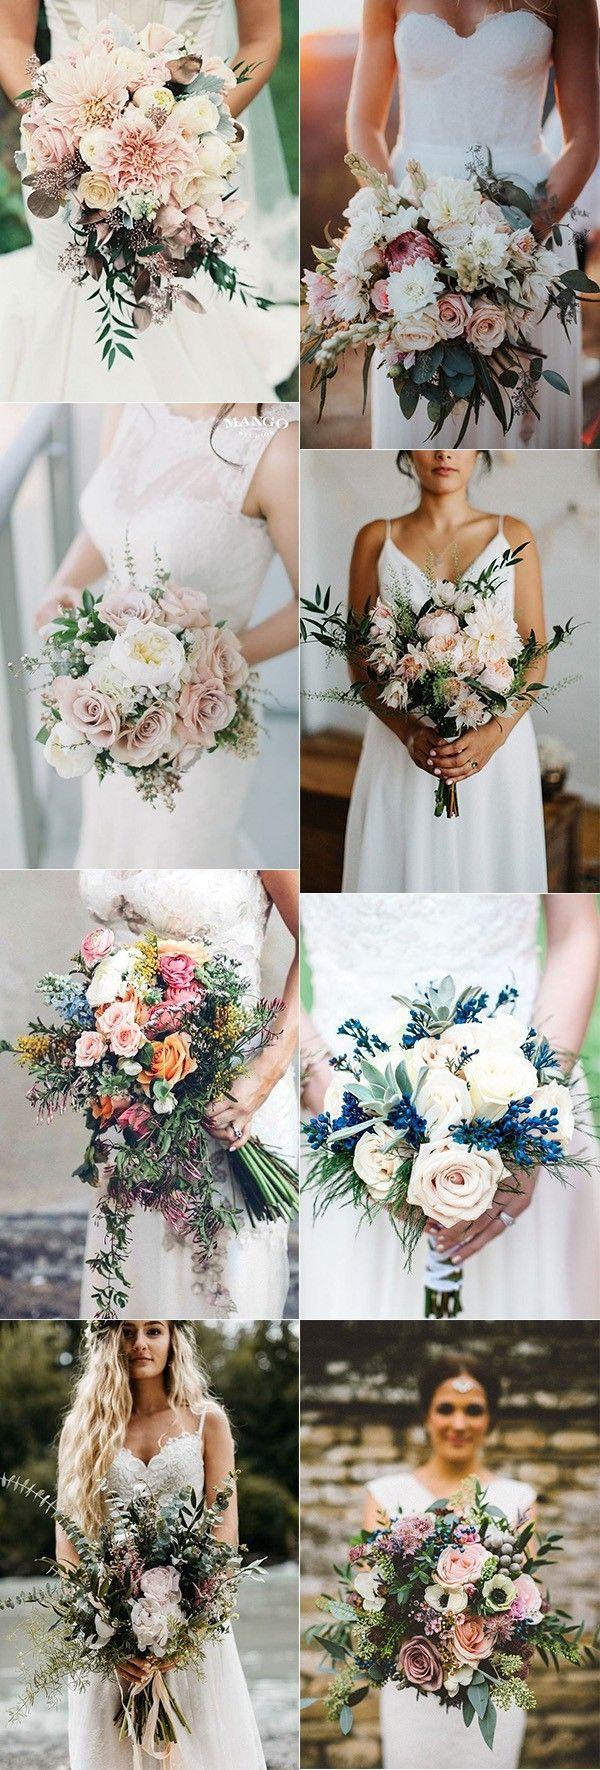 Mariage - 15 Stunning Wedding Bouquets For 2018 - Page 2 Of 2